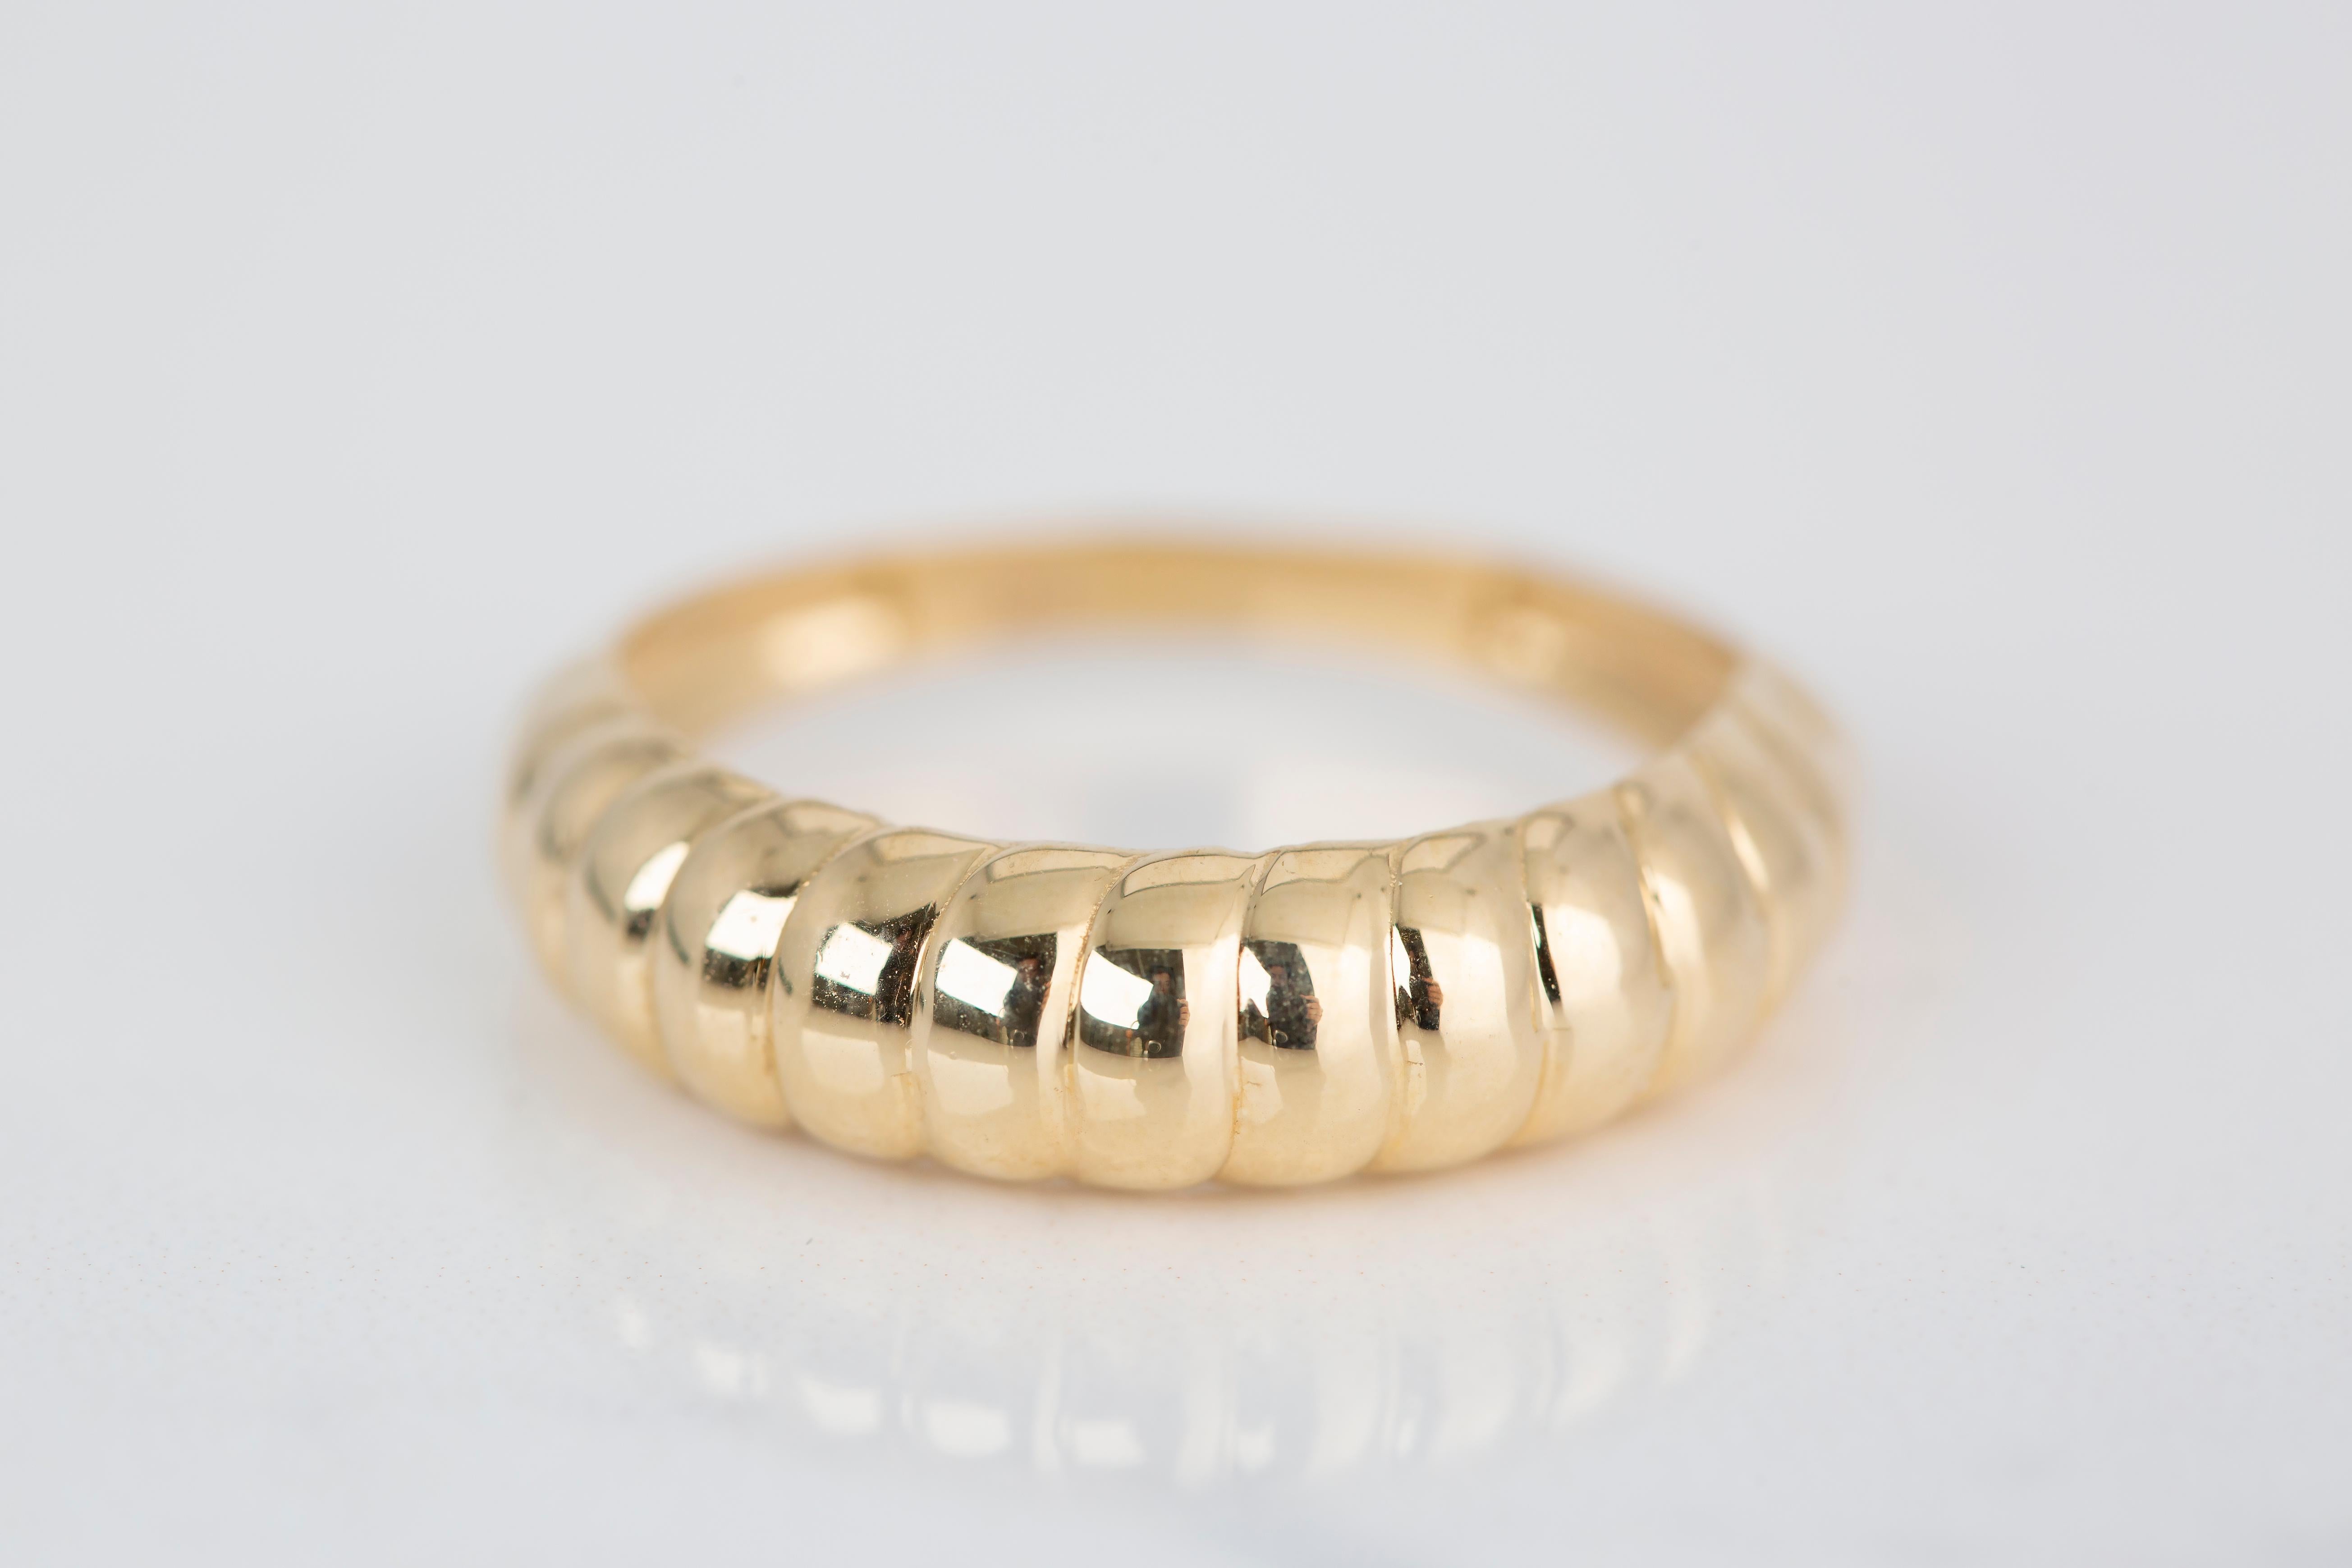 For Sale:  14K Gold Croissant Ring, Half Croissant Ring, Dome Ring 2